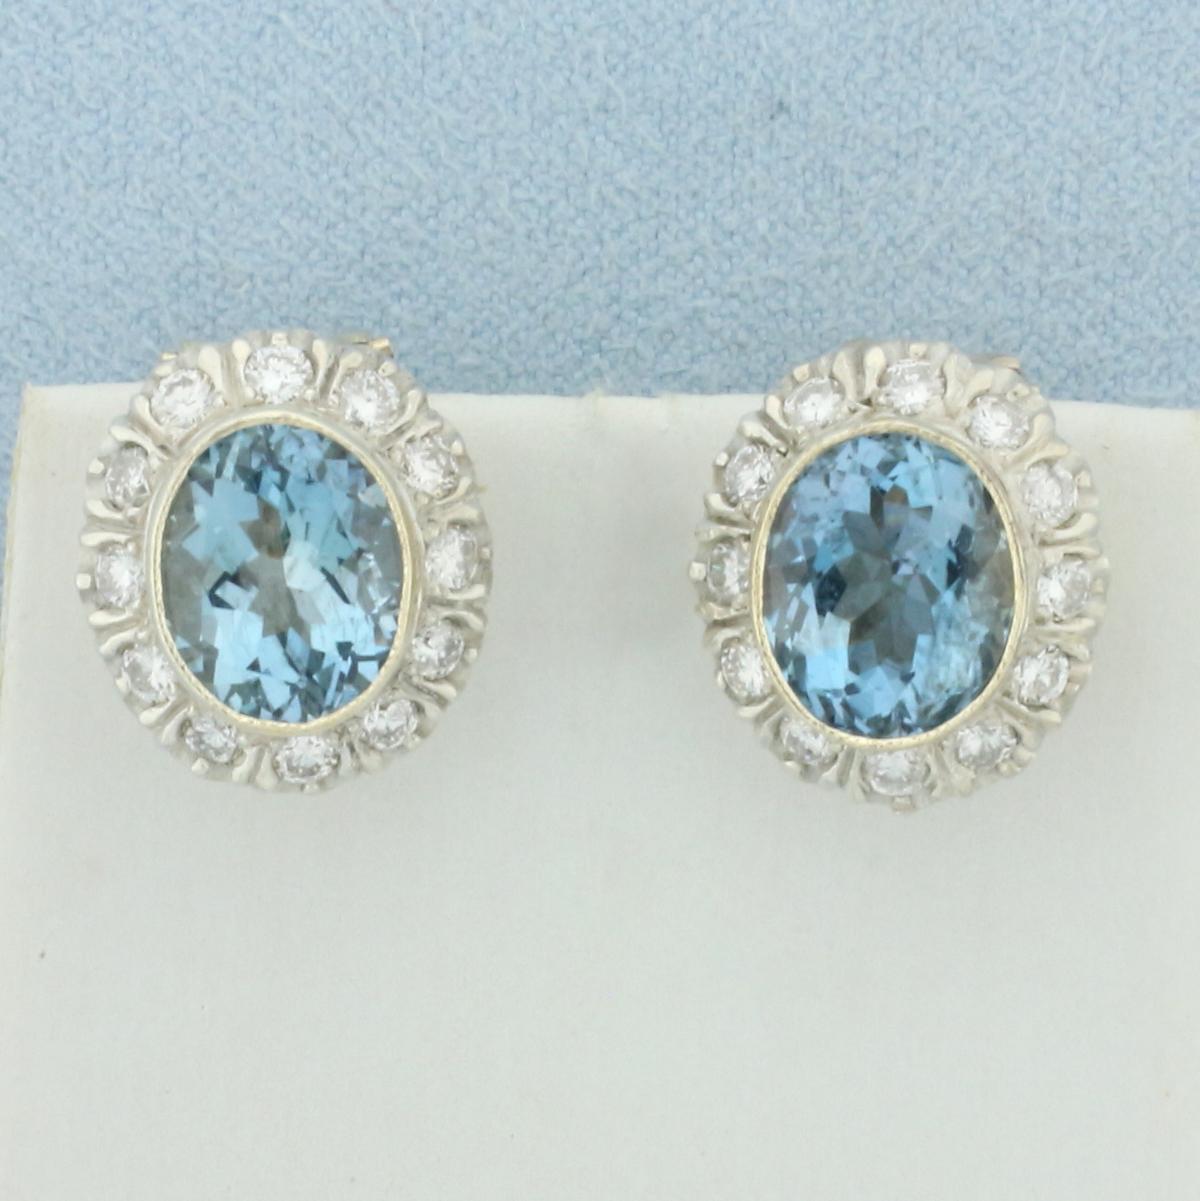 Vintage Aquamarine And Diamond Halo Earrings In 10k White Gold